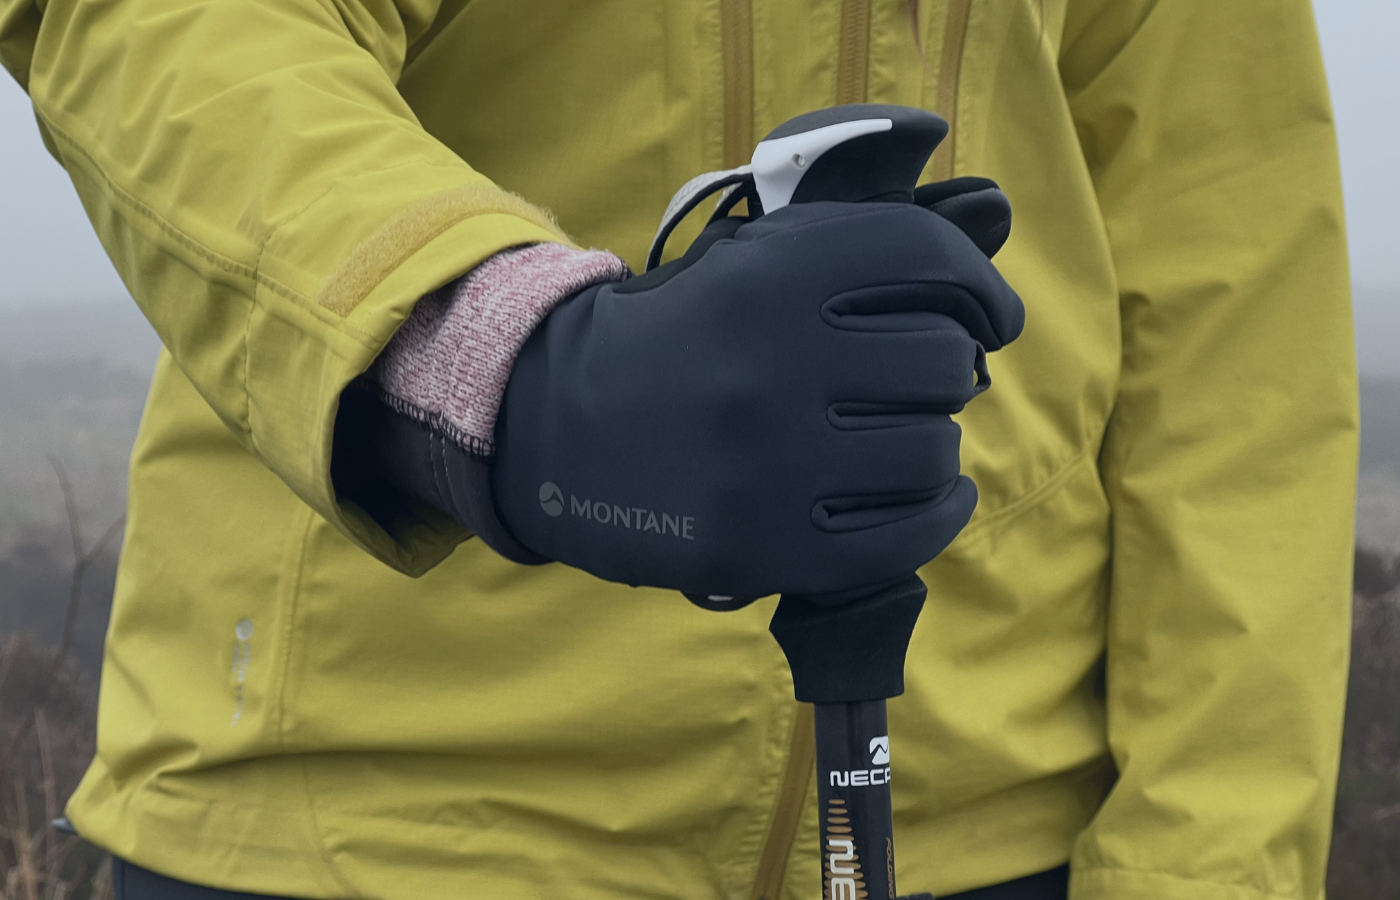 The Ultimate Guide to Work Gloves with Exceptional Grip: From Dot-Patterned  to Silicone Coated and Cold Grip